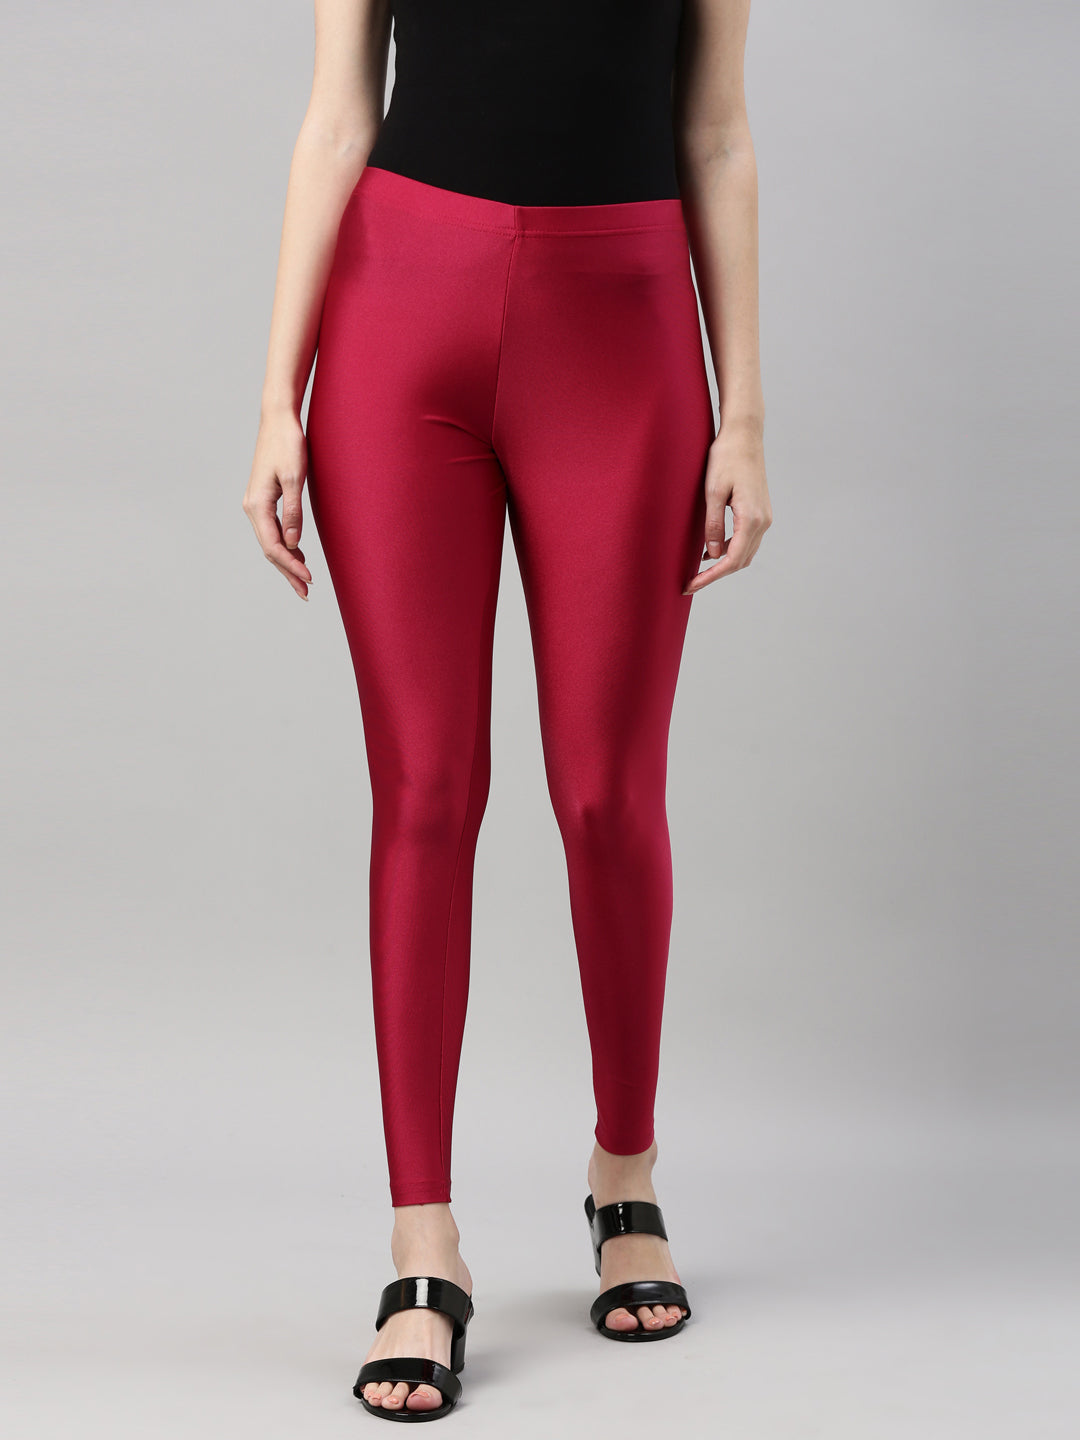 Sparkle at Your Next Workout Session With These Leggings | Us Weekly